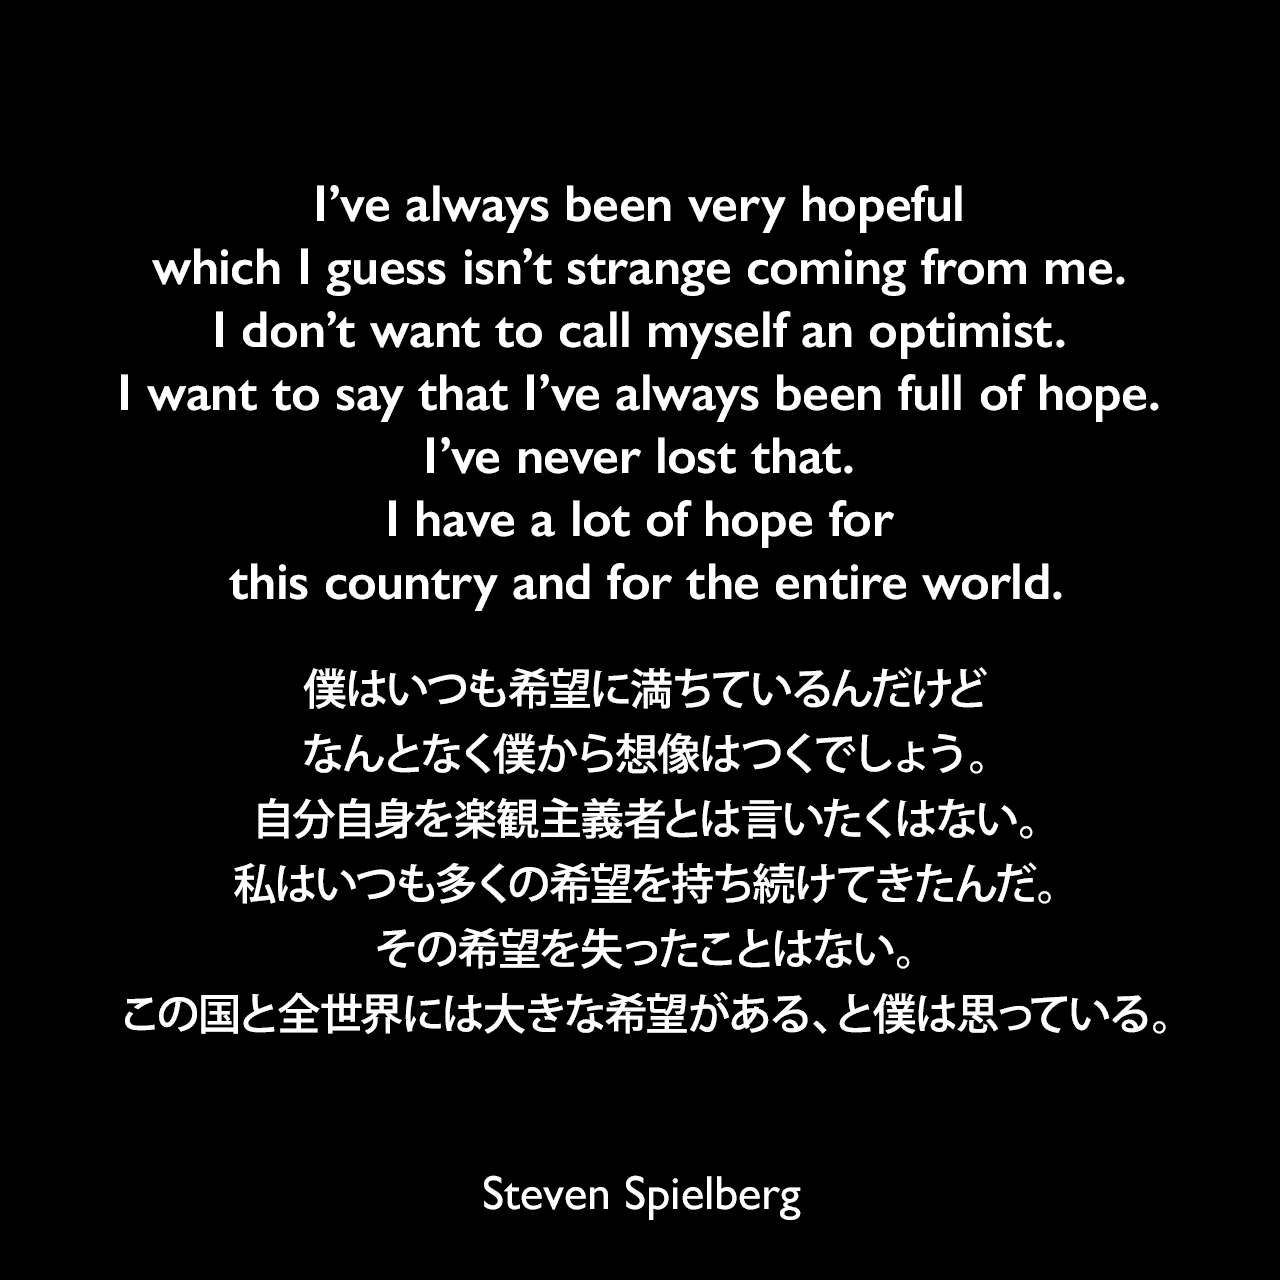 I’ve always been very hopeful which I guess isn’t strange coming from me. I don’t want to call myself an optimist. I want to say that I’ve always been full of hope. I’ve never lost that. I have a lot of hope for this country and for the entire world.僕はいつも希望に満ちているんだけど、なんとなく僕から想像はつくでしょう。自分自身を楽観主義者とは言いたくはない。私はいつも多くの希望を持ち続けてきたんだ。その希望を失ったことはない。この国と全世界には大きな希望がある、と僕は思っている。Steven Spielberg